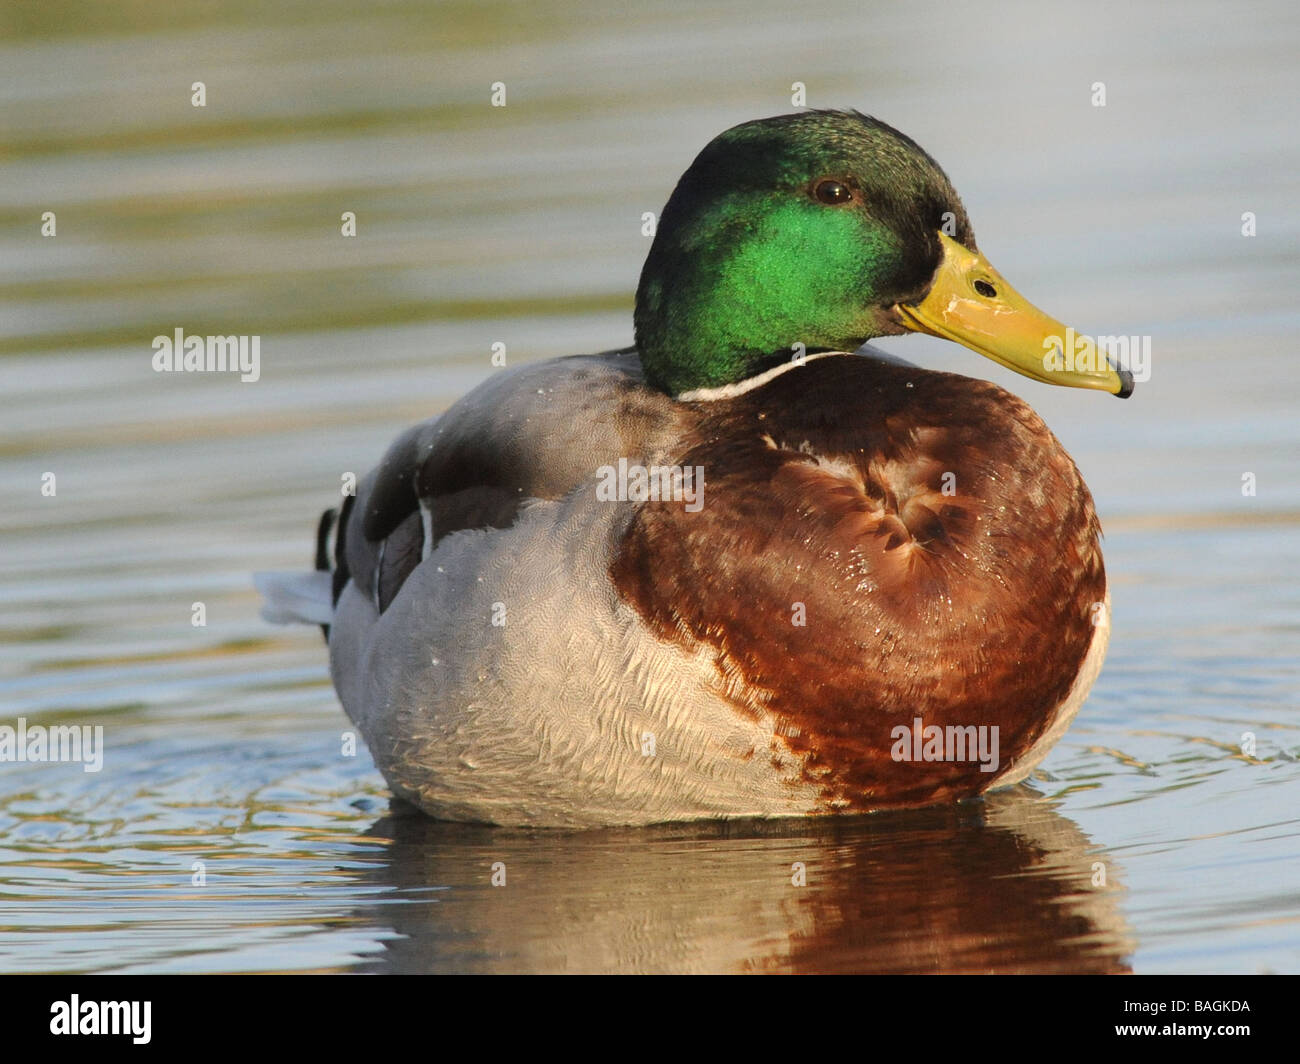 A male mallard duck in the water, with a heart shape on his body. Stock Photo